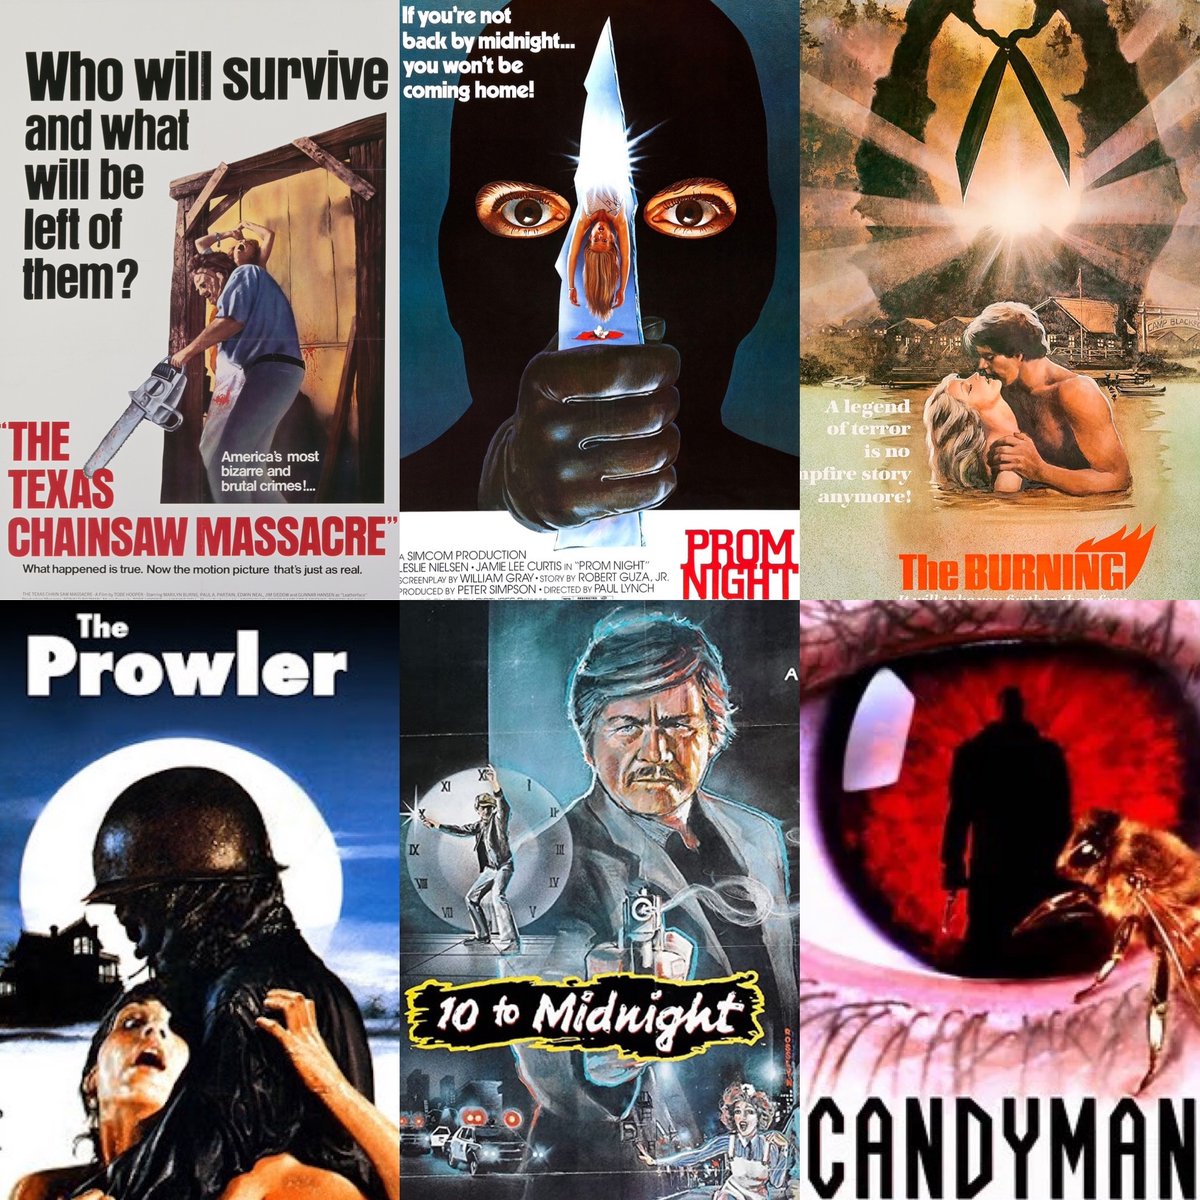 April 2024 on the “With @GourleyAndRust” podcast, @MattGourley & me are having a MISH-MASH SLASH BASH! Six slasher movies (including classics and hidden gems!) Listen at patreon.com/withgourleyand… Texas Chainsaw Massacre Prom Night The Burning The Prowler 10 to Midnight Handyman